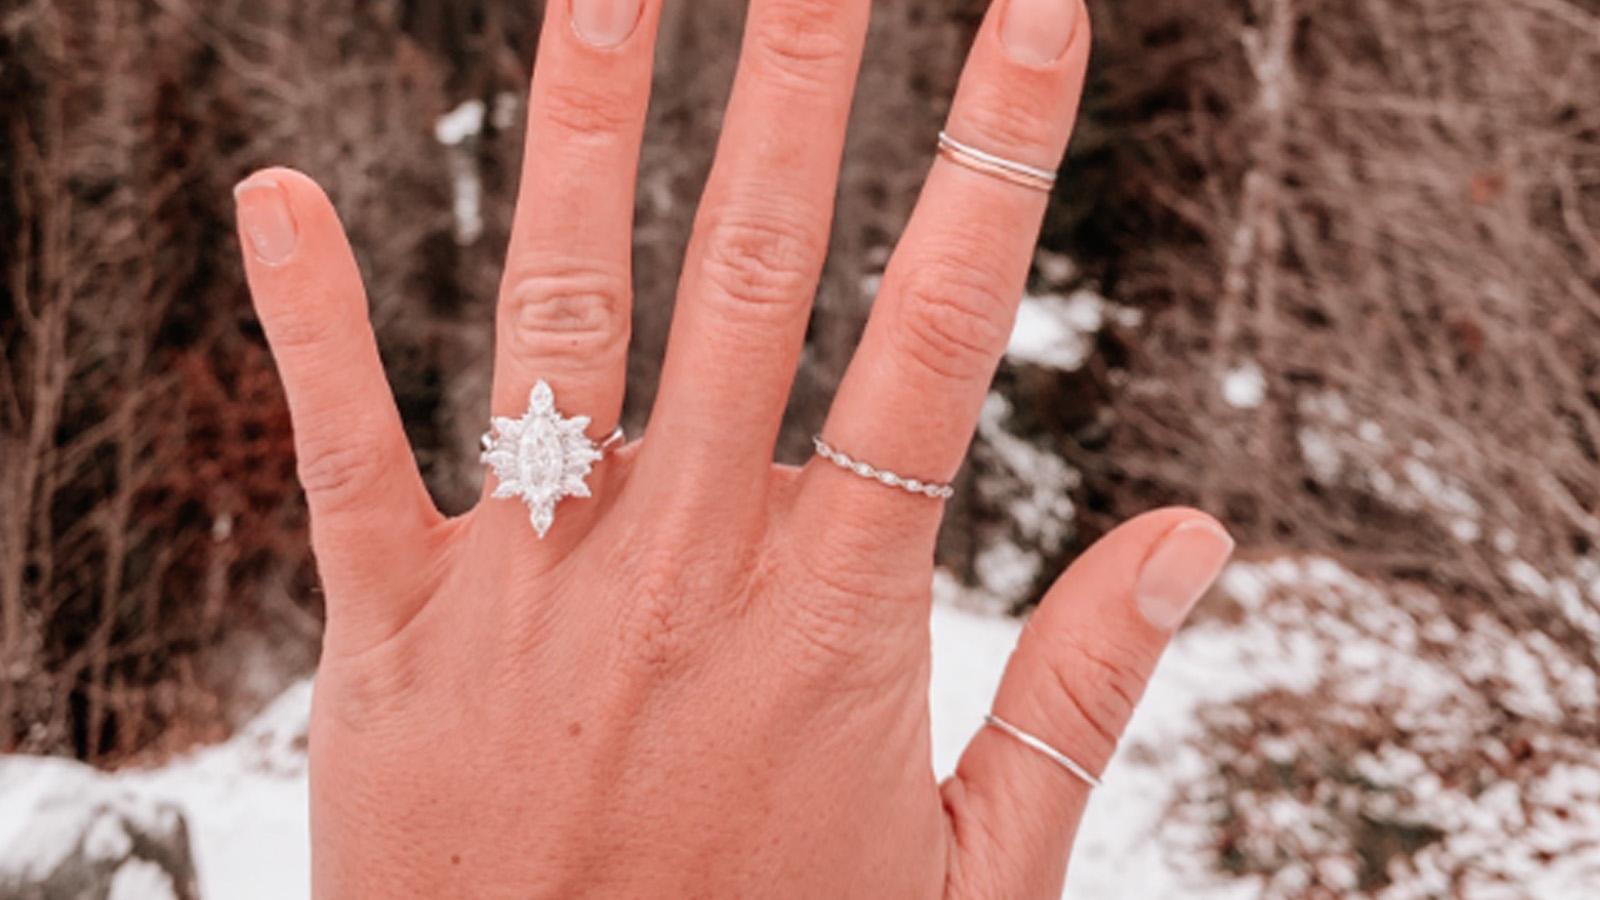 Woman selling engagement ring bombarded by creepy Facebook messages